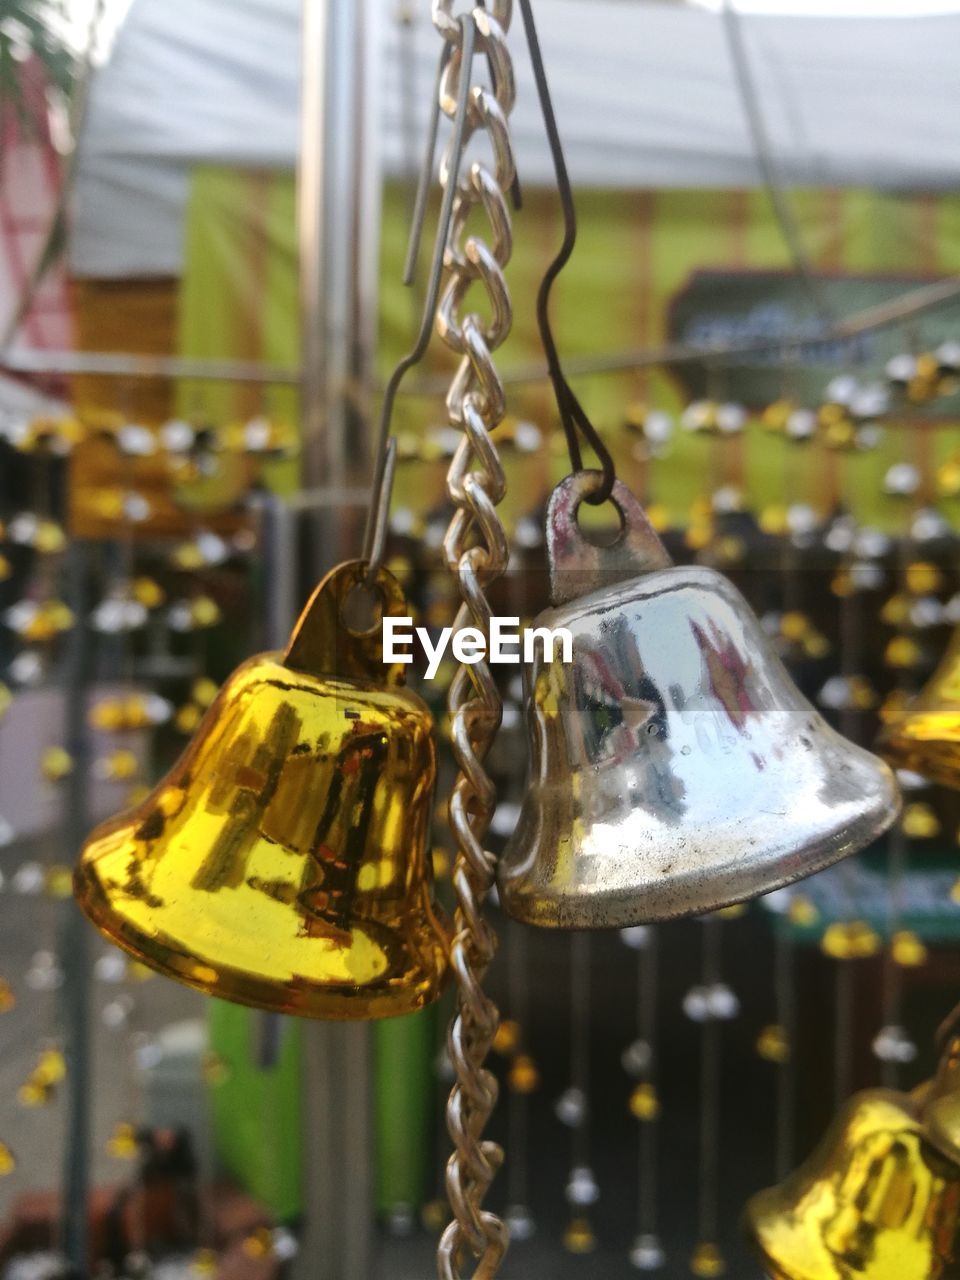 CLOSE-UP OF CHAIN SWING RIDE IN PARK